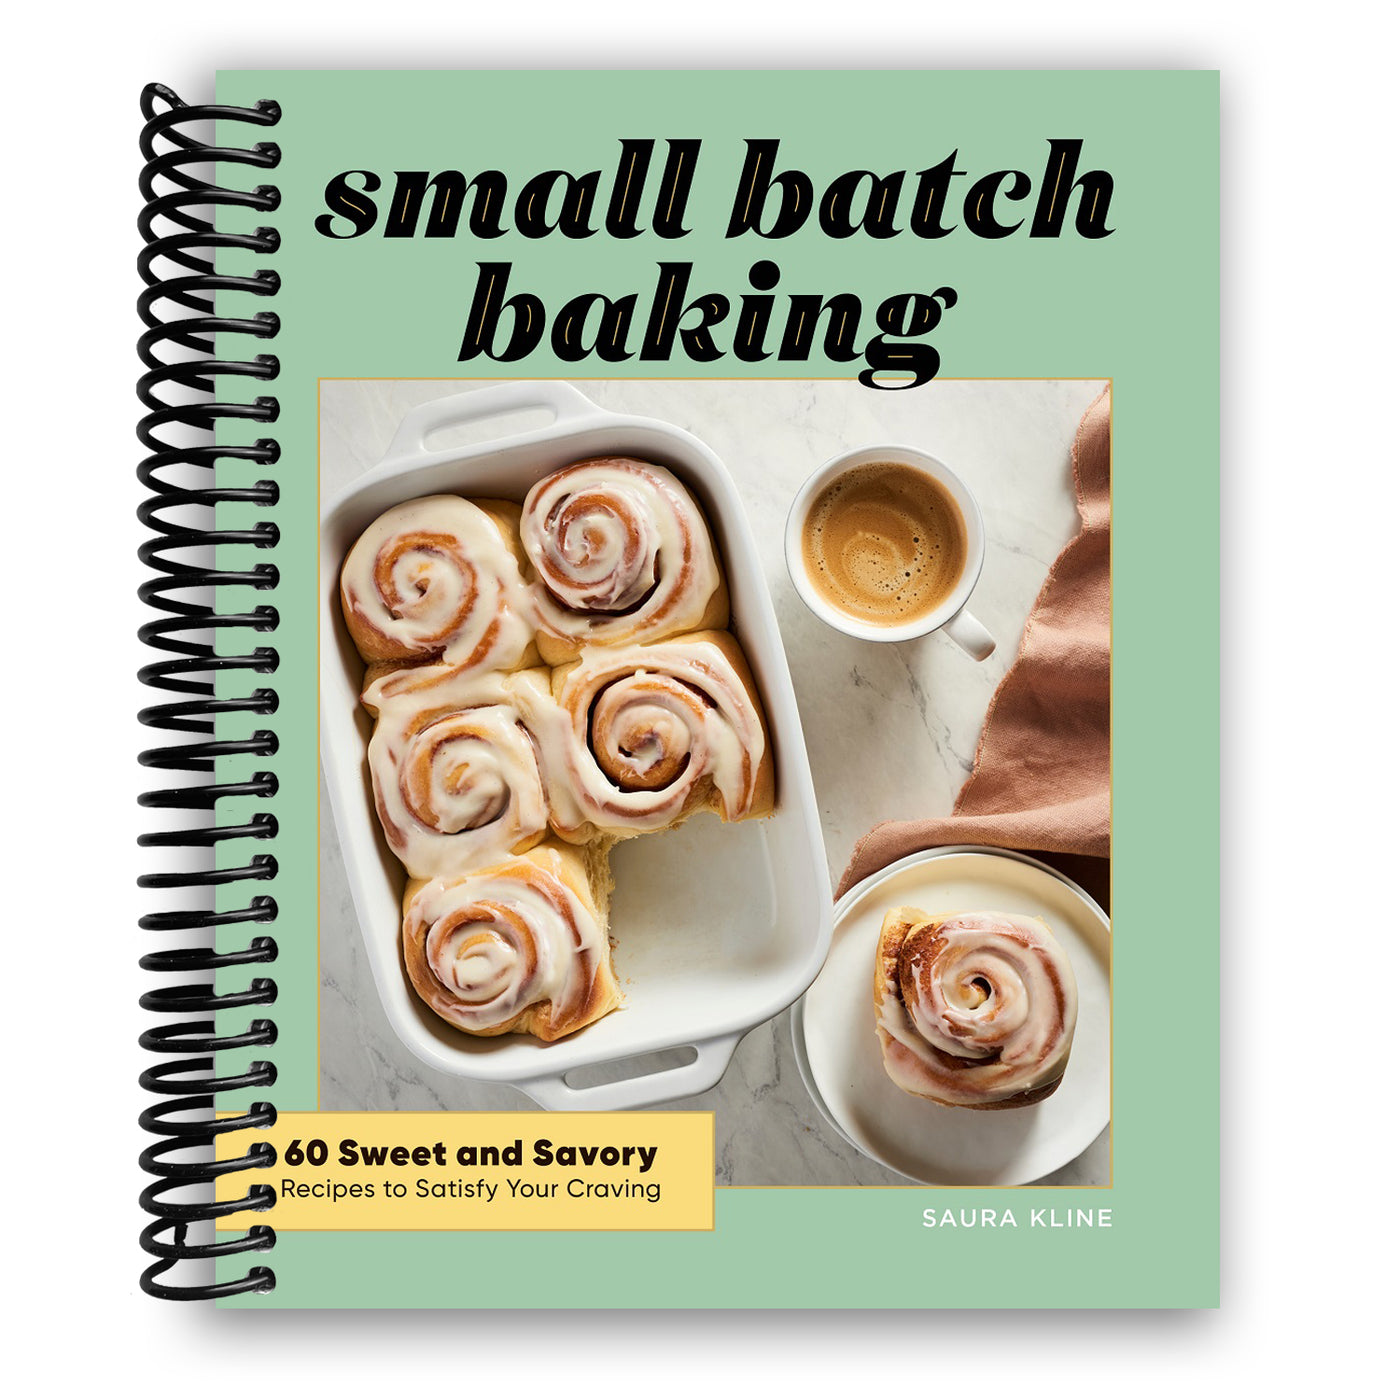 Small Batch Baking: 60 Sweet and Savory Recipes to Satisfy Your Craving (Spiral Bound)